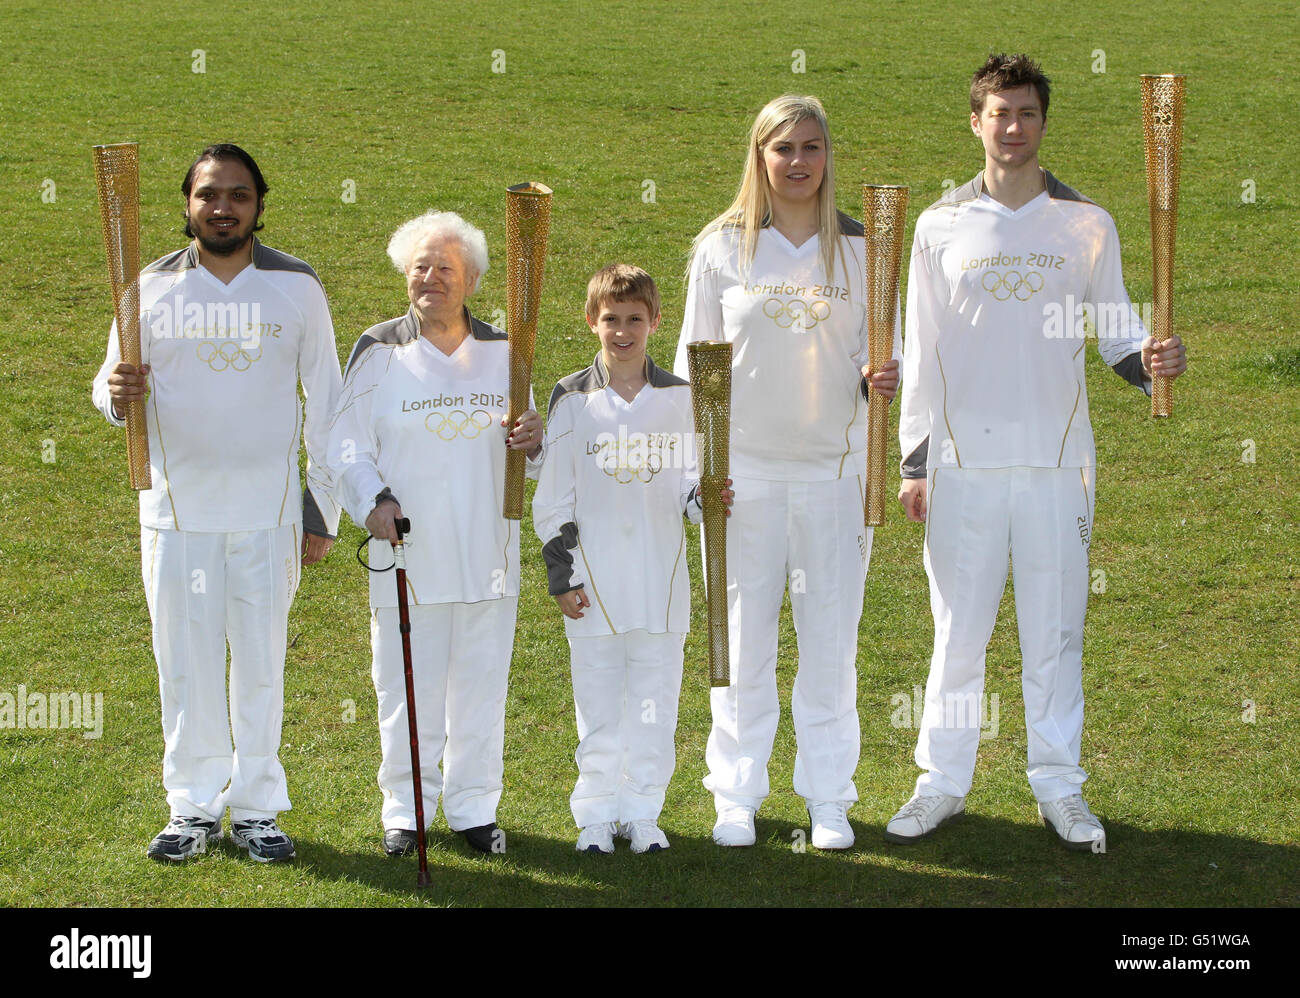 London 2012 Torchbearers (left to right) Abul Kasam aged 30, Dinah Gould aged 99, Dominic John MacGowan aged 11, Rosy Ryan aged 17 and Aidan Kirkwood aged 23 during a photocall at Redlands Primary School, London. Stock Photo